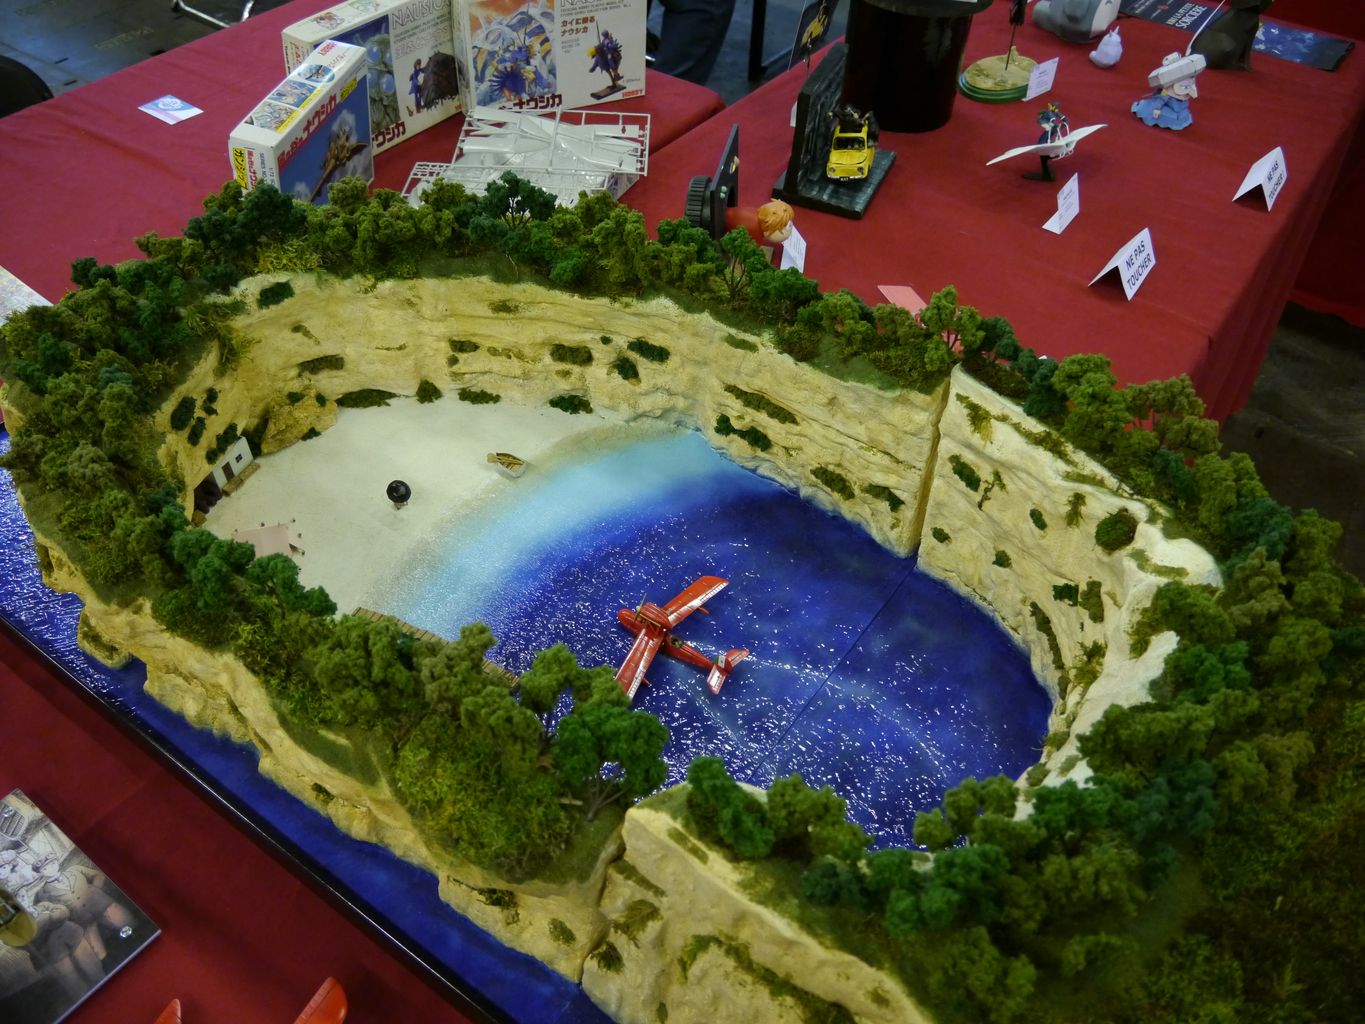 Japan EXPO 2014 in Paris: Anigetter exhibition Photoreport! Gunpla and Others! Enjoy ...